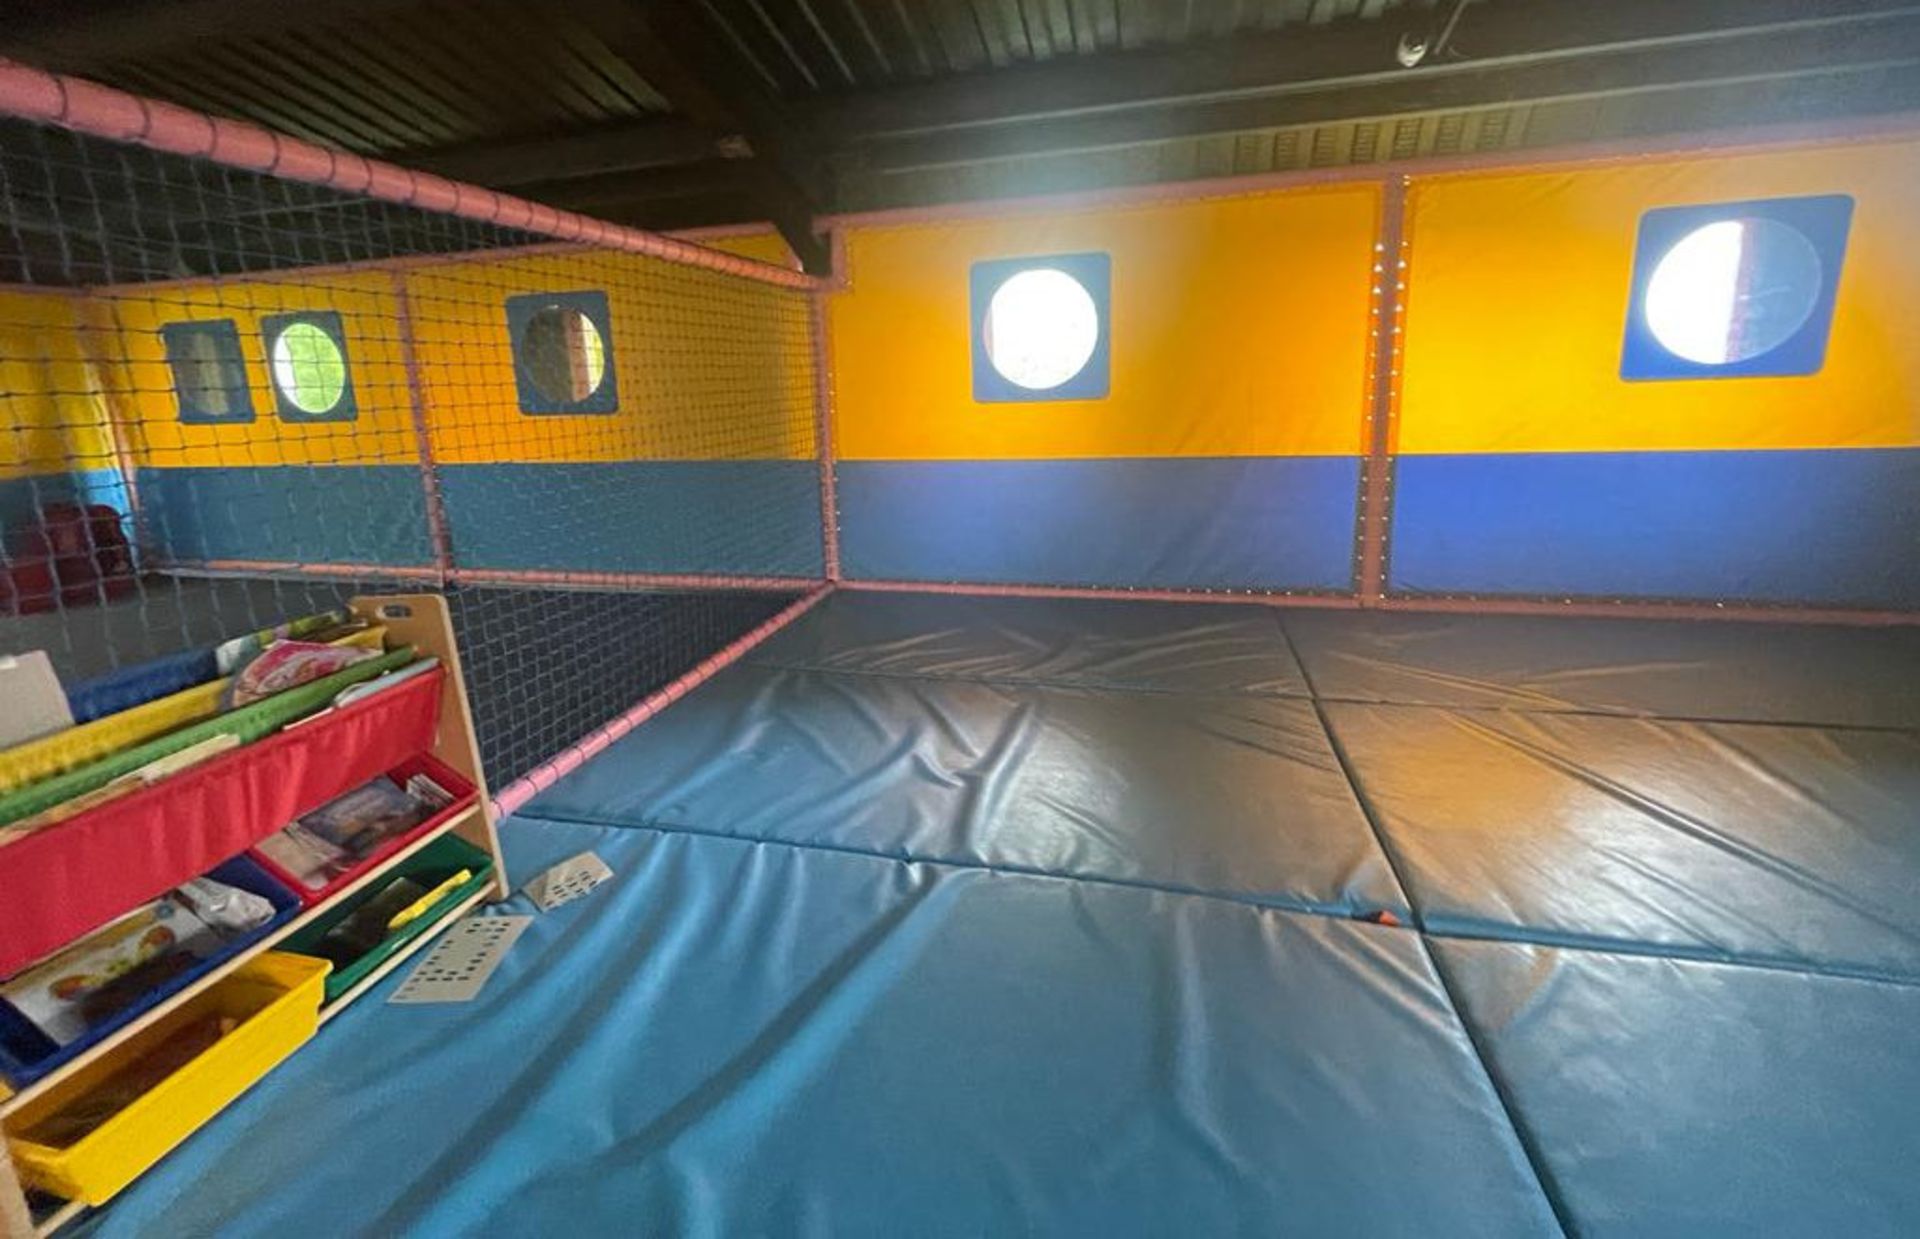 1 x Trampoline Park With Over 40 Interconnected Trampolines, Inflatable Activity Area, Waiting - Image 8 of 99